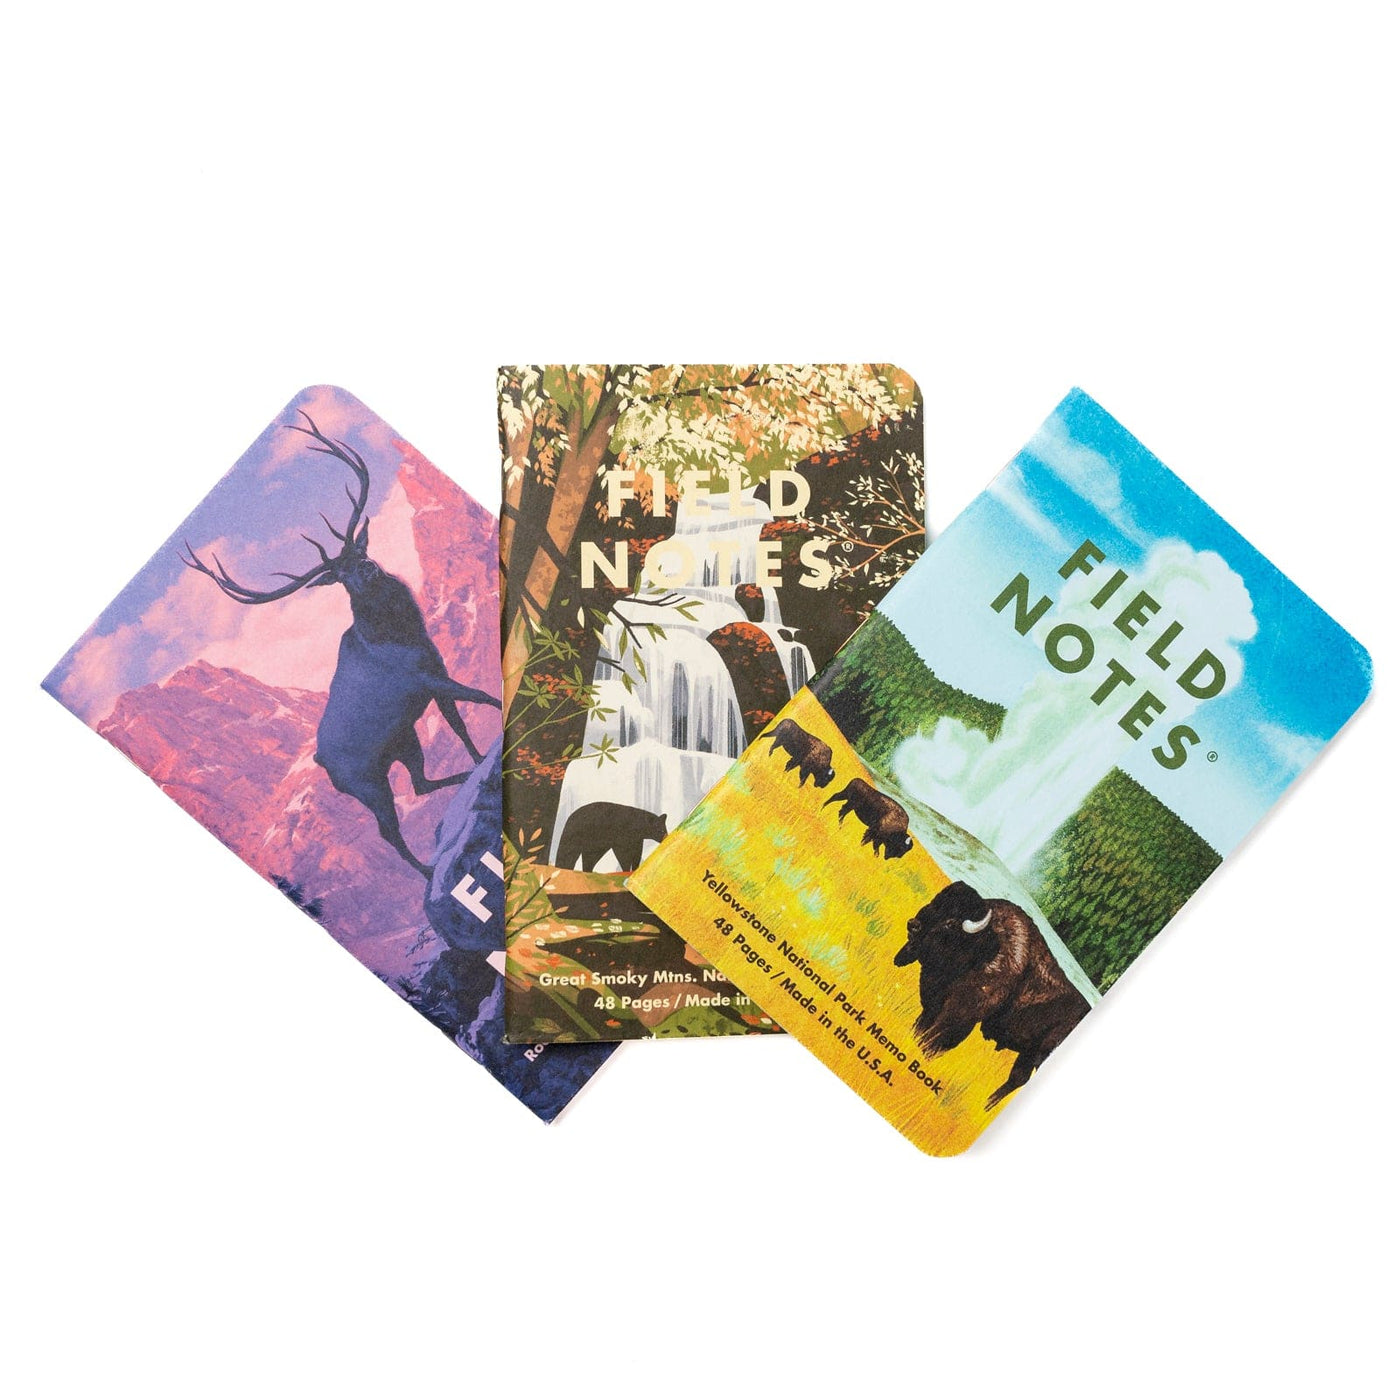 Field Notes Notebooks - National Parks Field Notes